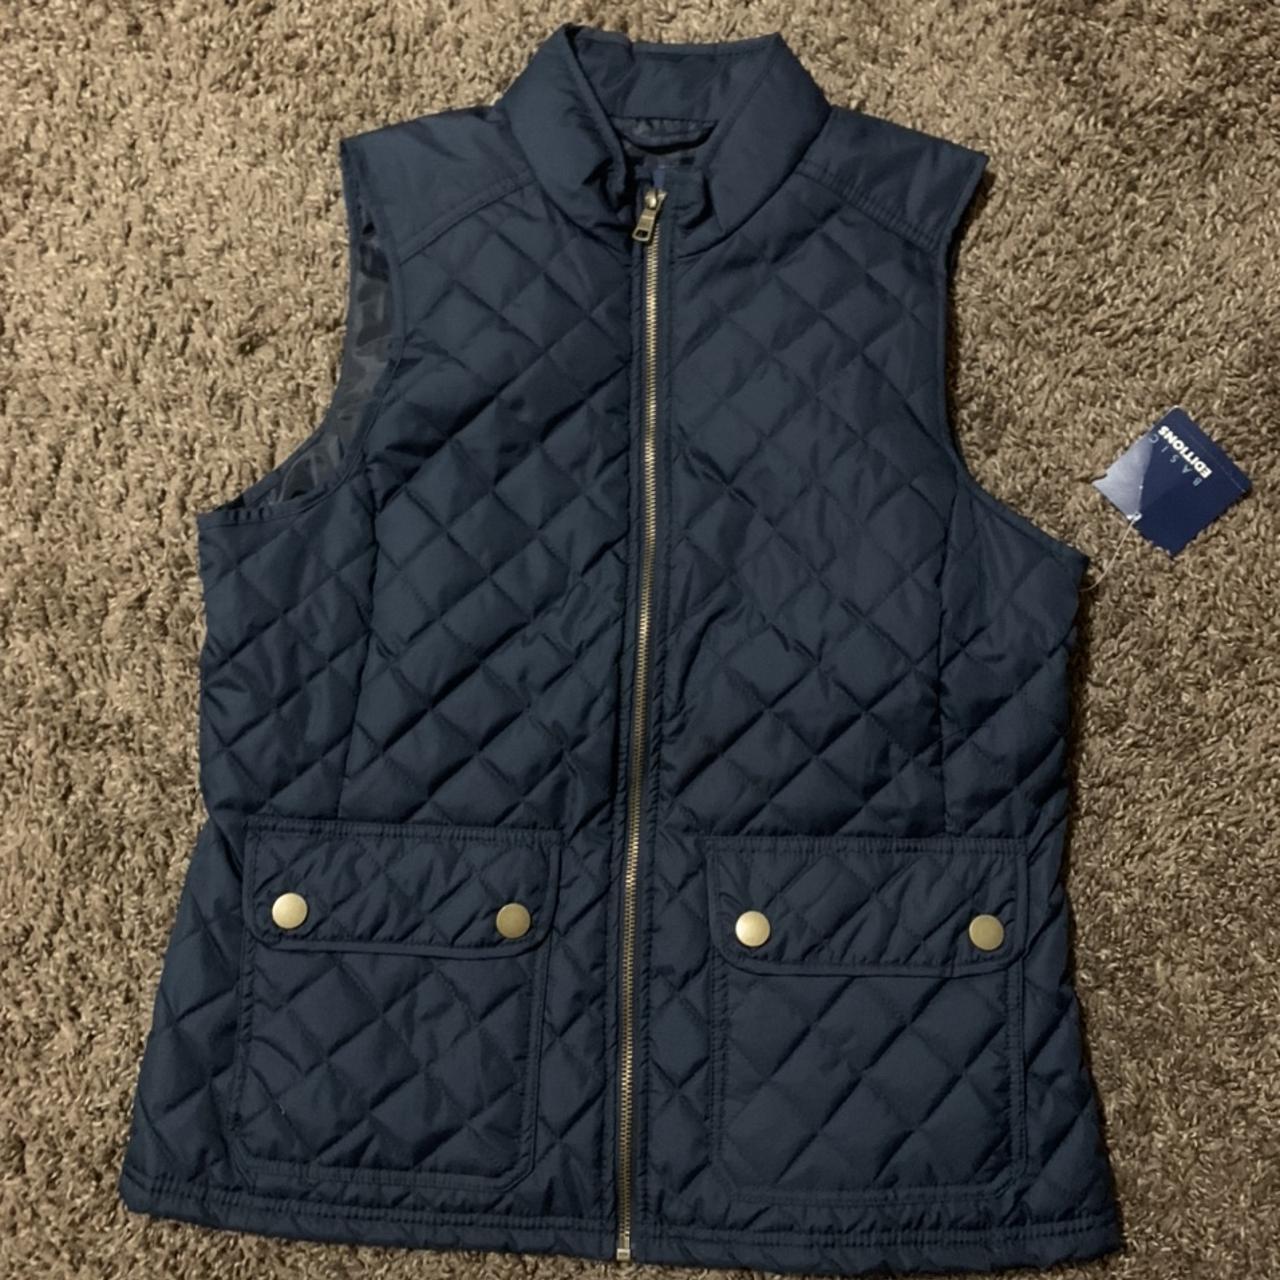 Basic Editions Women's Navy and Gold Gilet